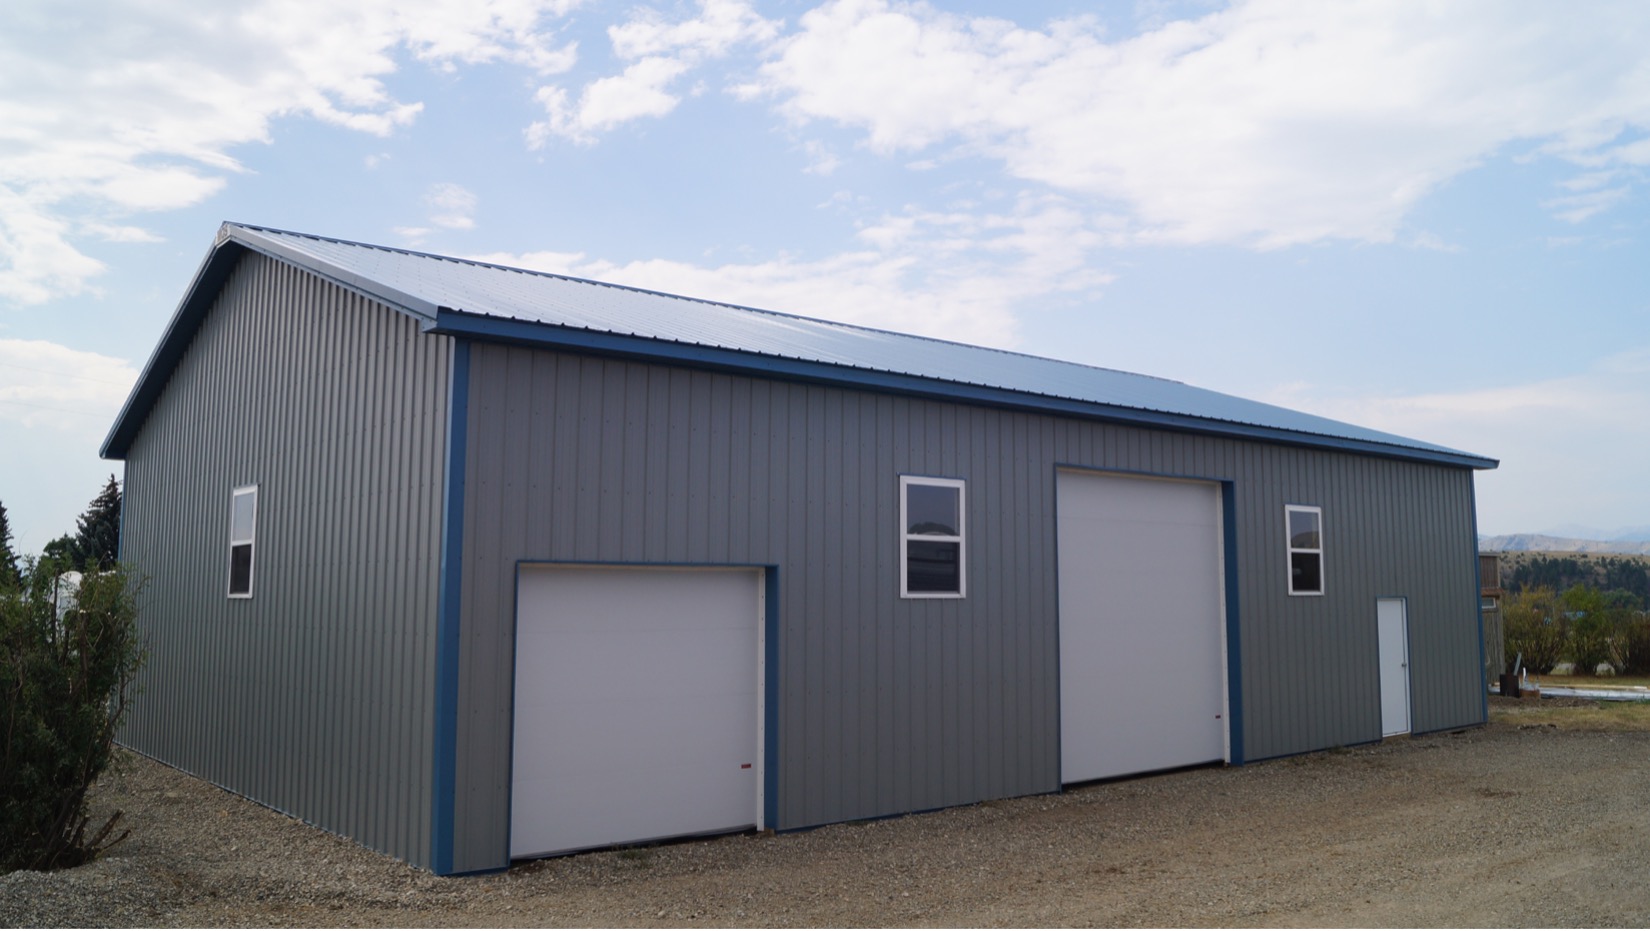 7 Lighting Tips for Your New Metal Buildings in Montana